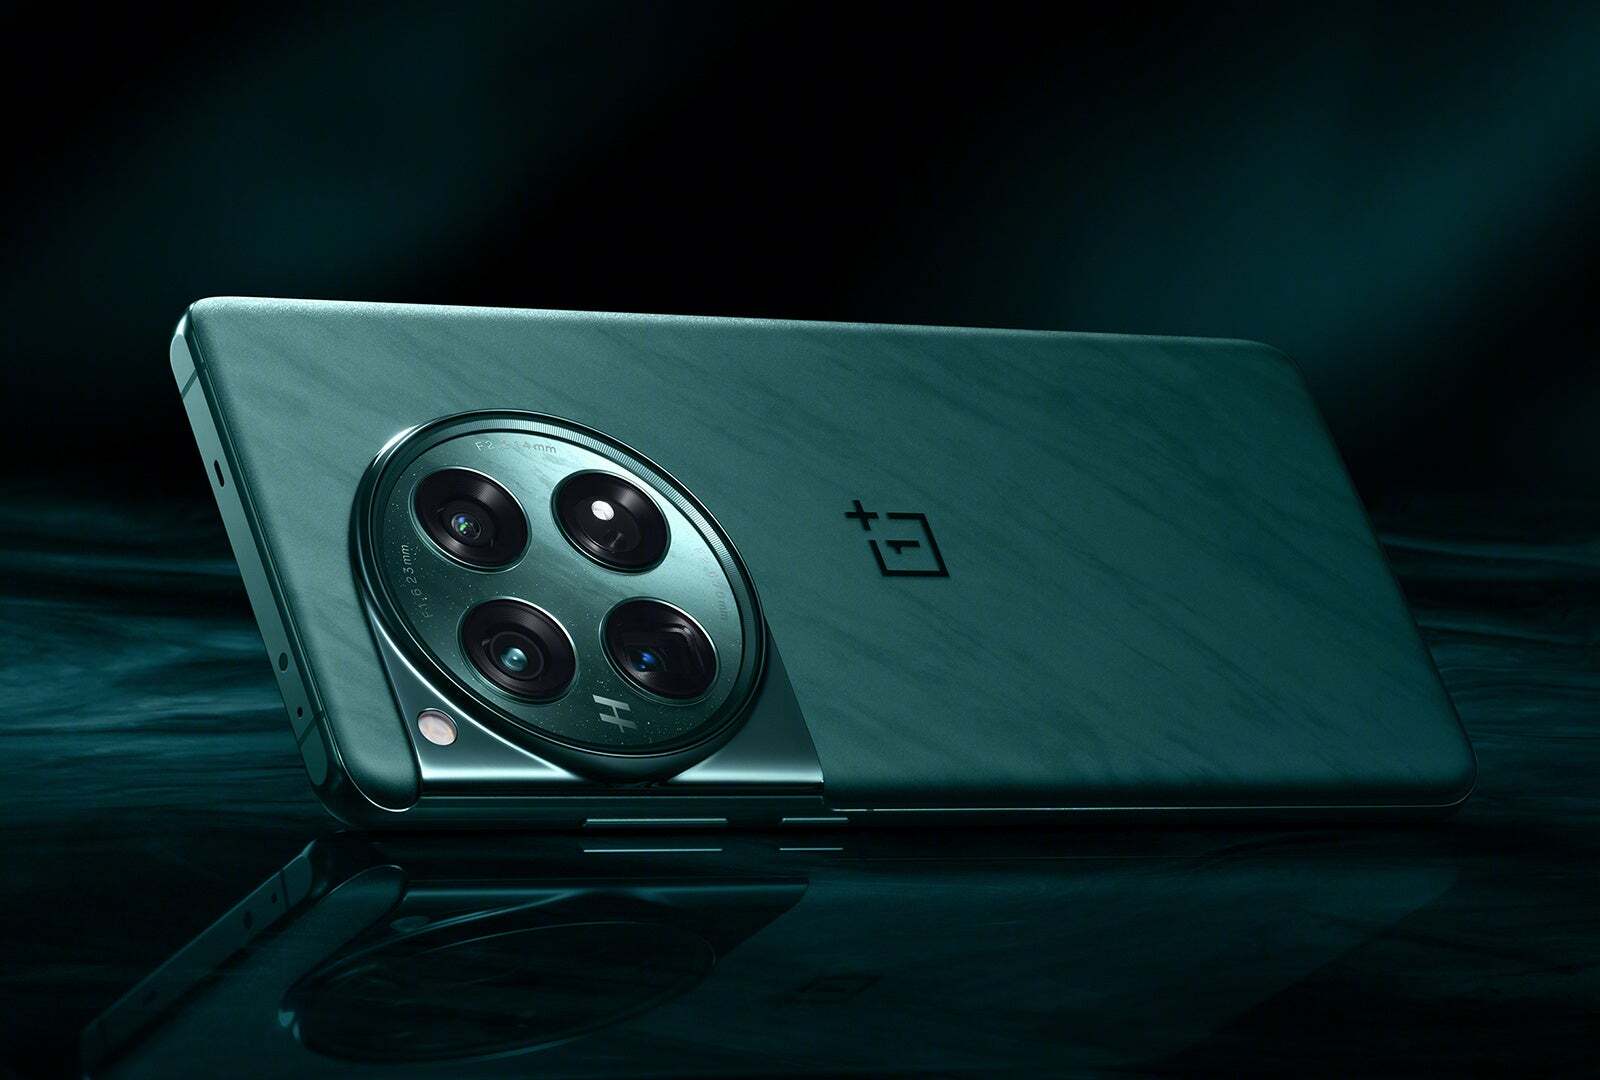 The OnePlus 12 in green (Image source - OnePlus) - OnePlus 12 colors: what to expect